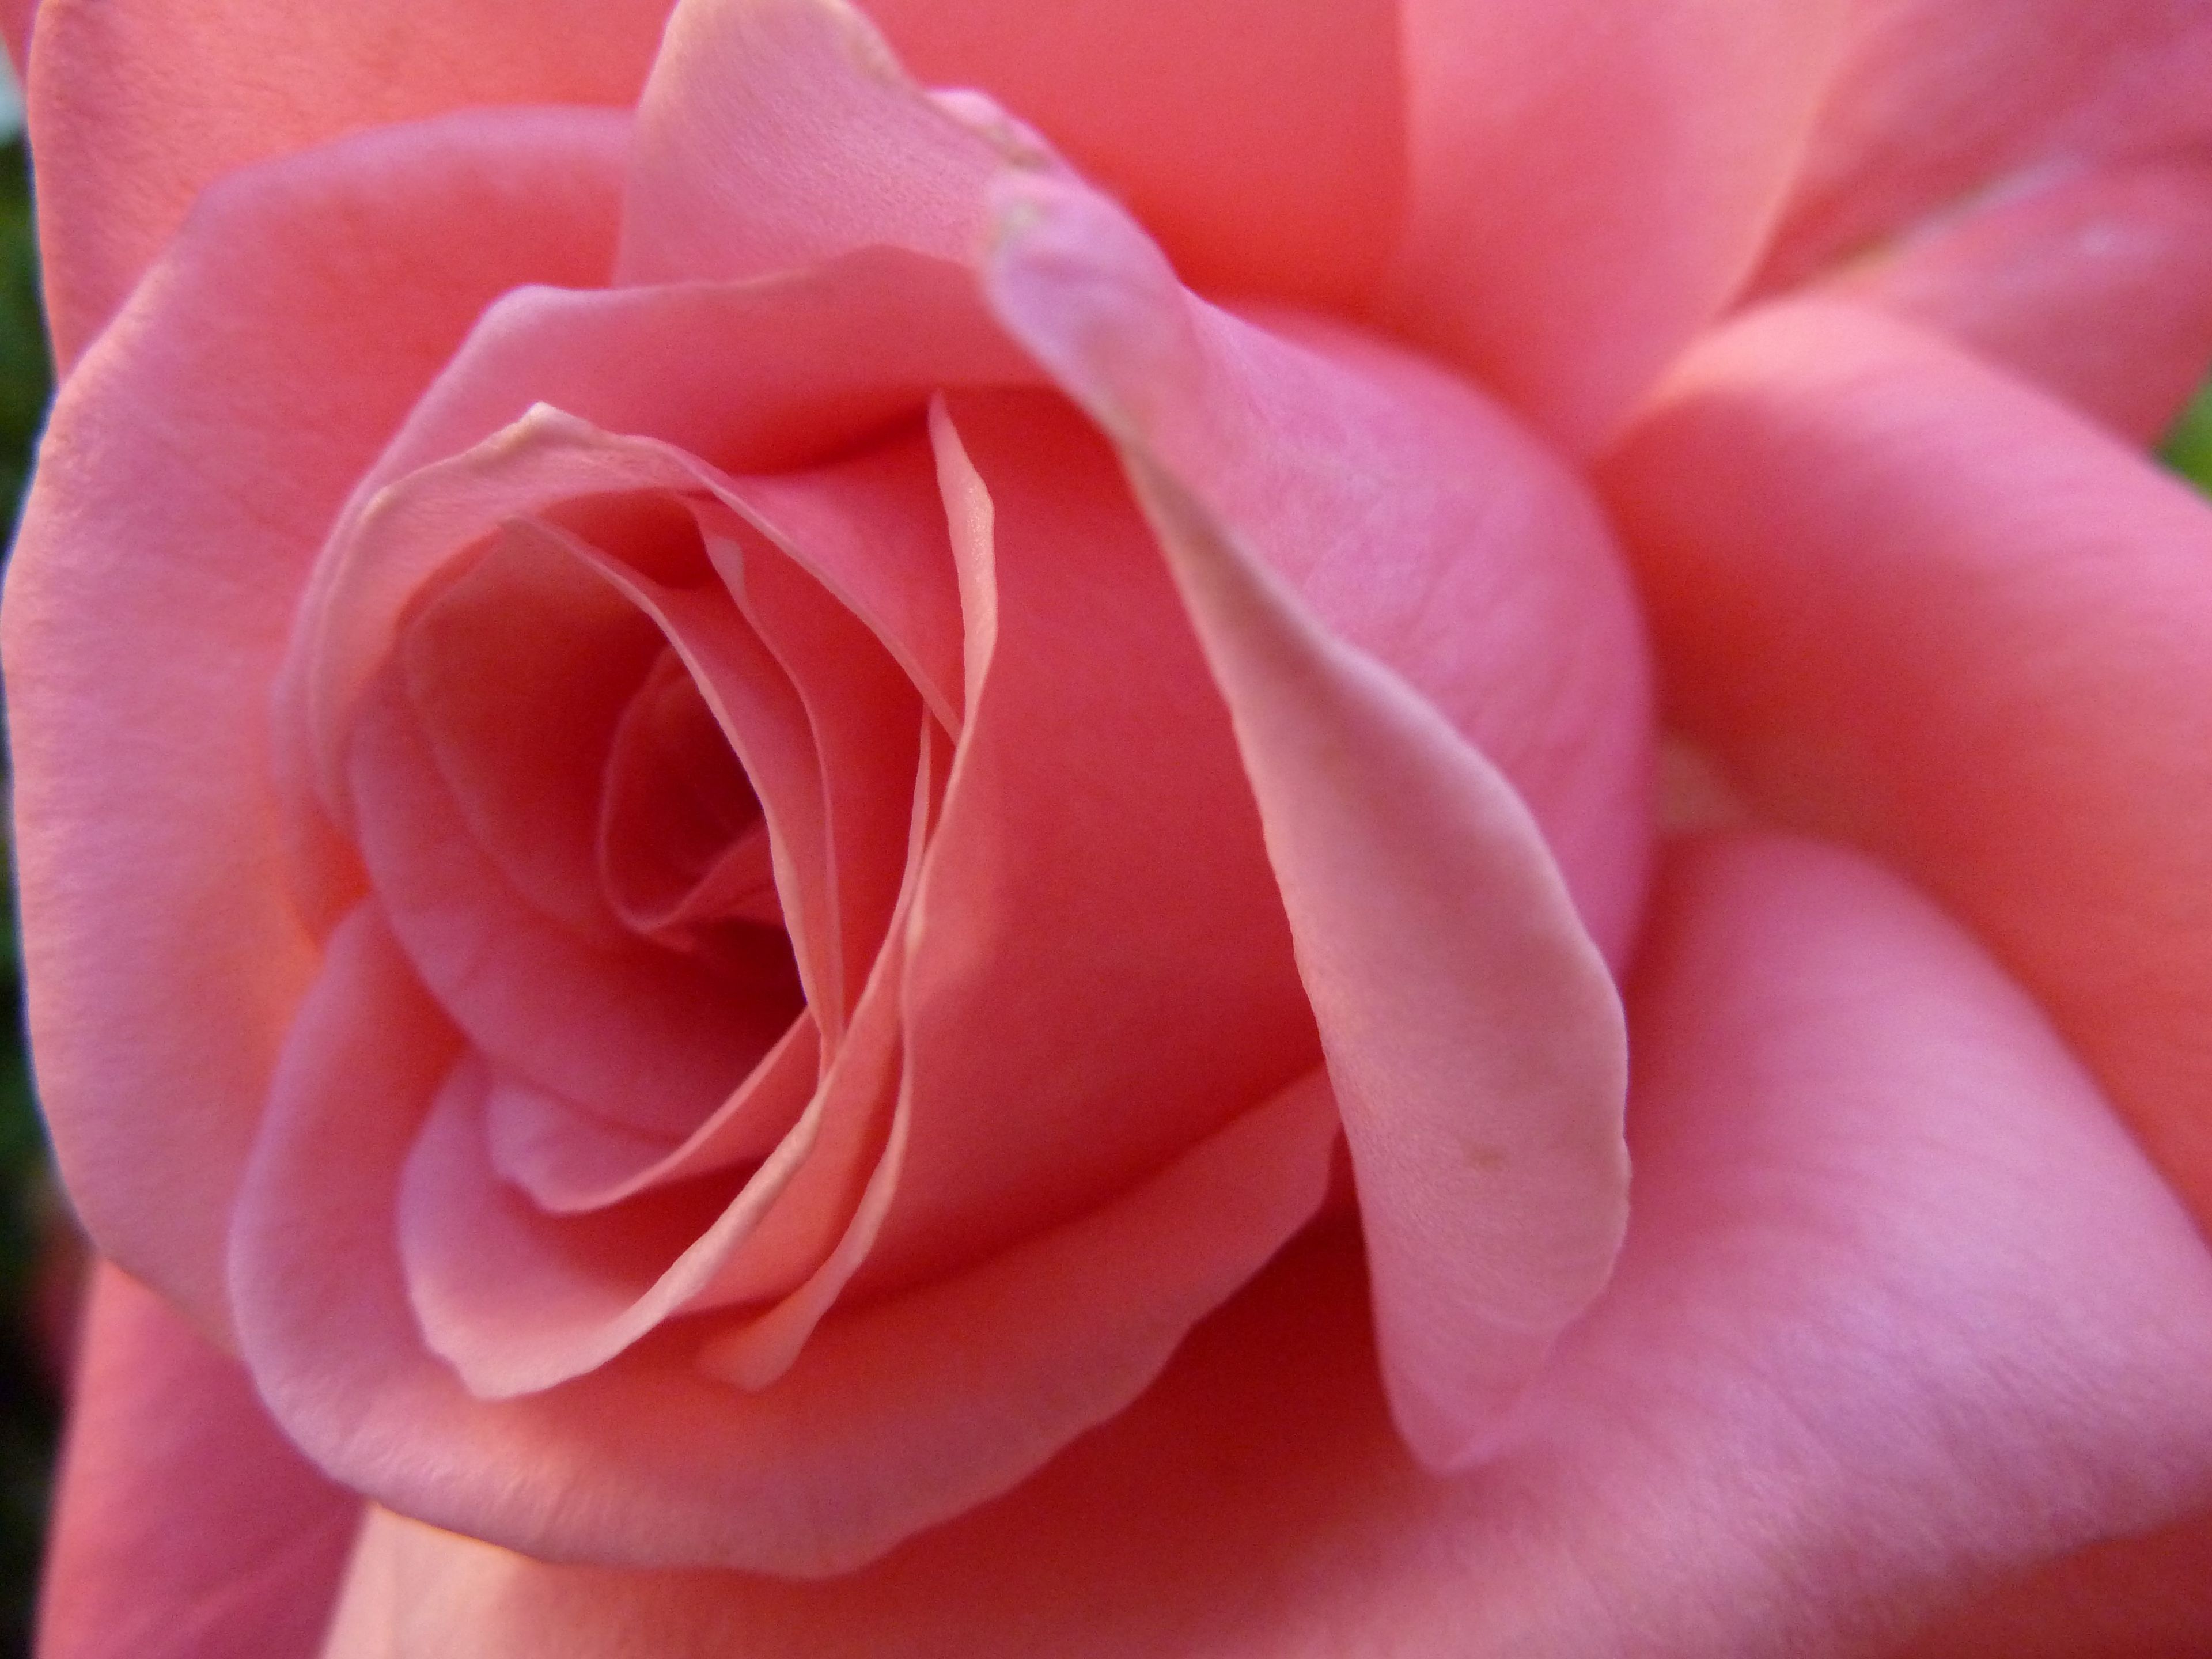 An image of a pink rose.